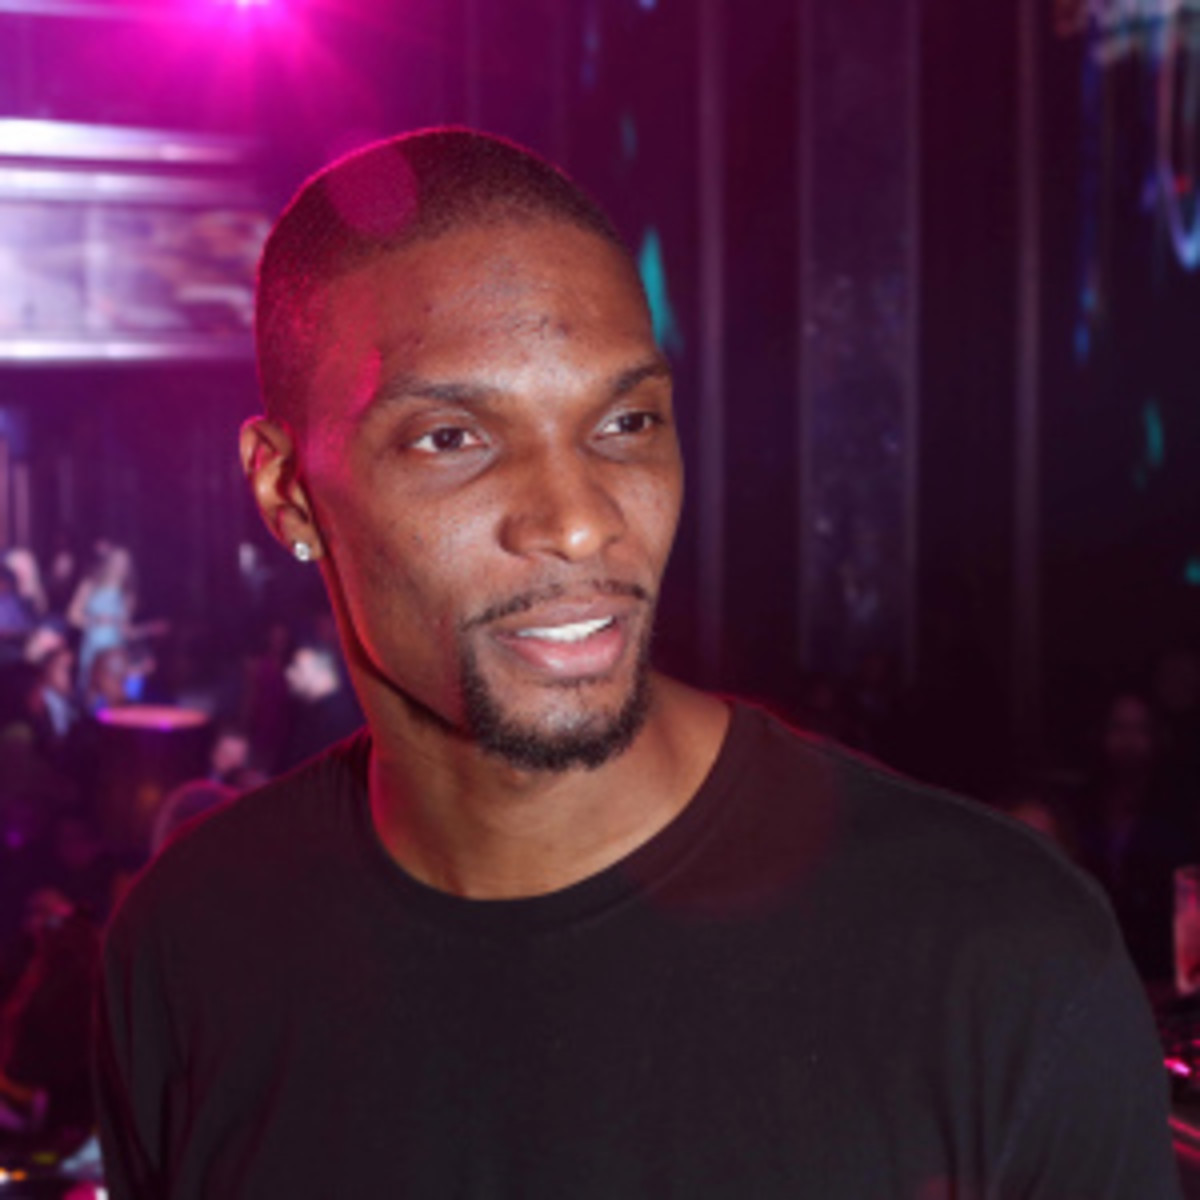 Chris Bosh had $470K in accessories stolen from his South Beach home. (Aaron Davidson/Getty Images)